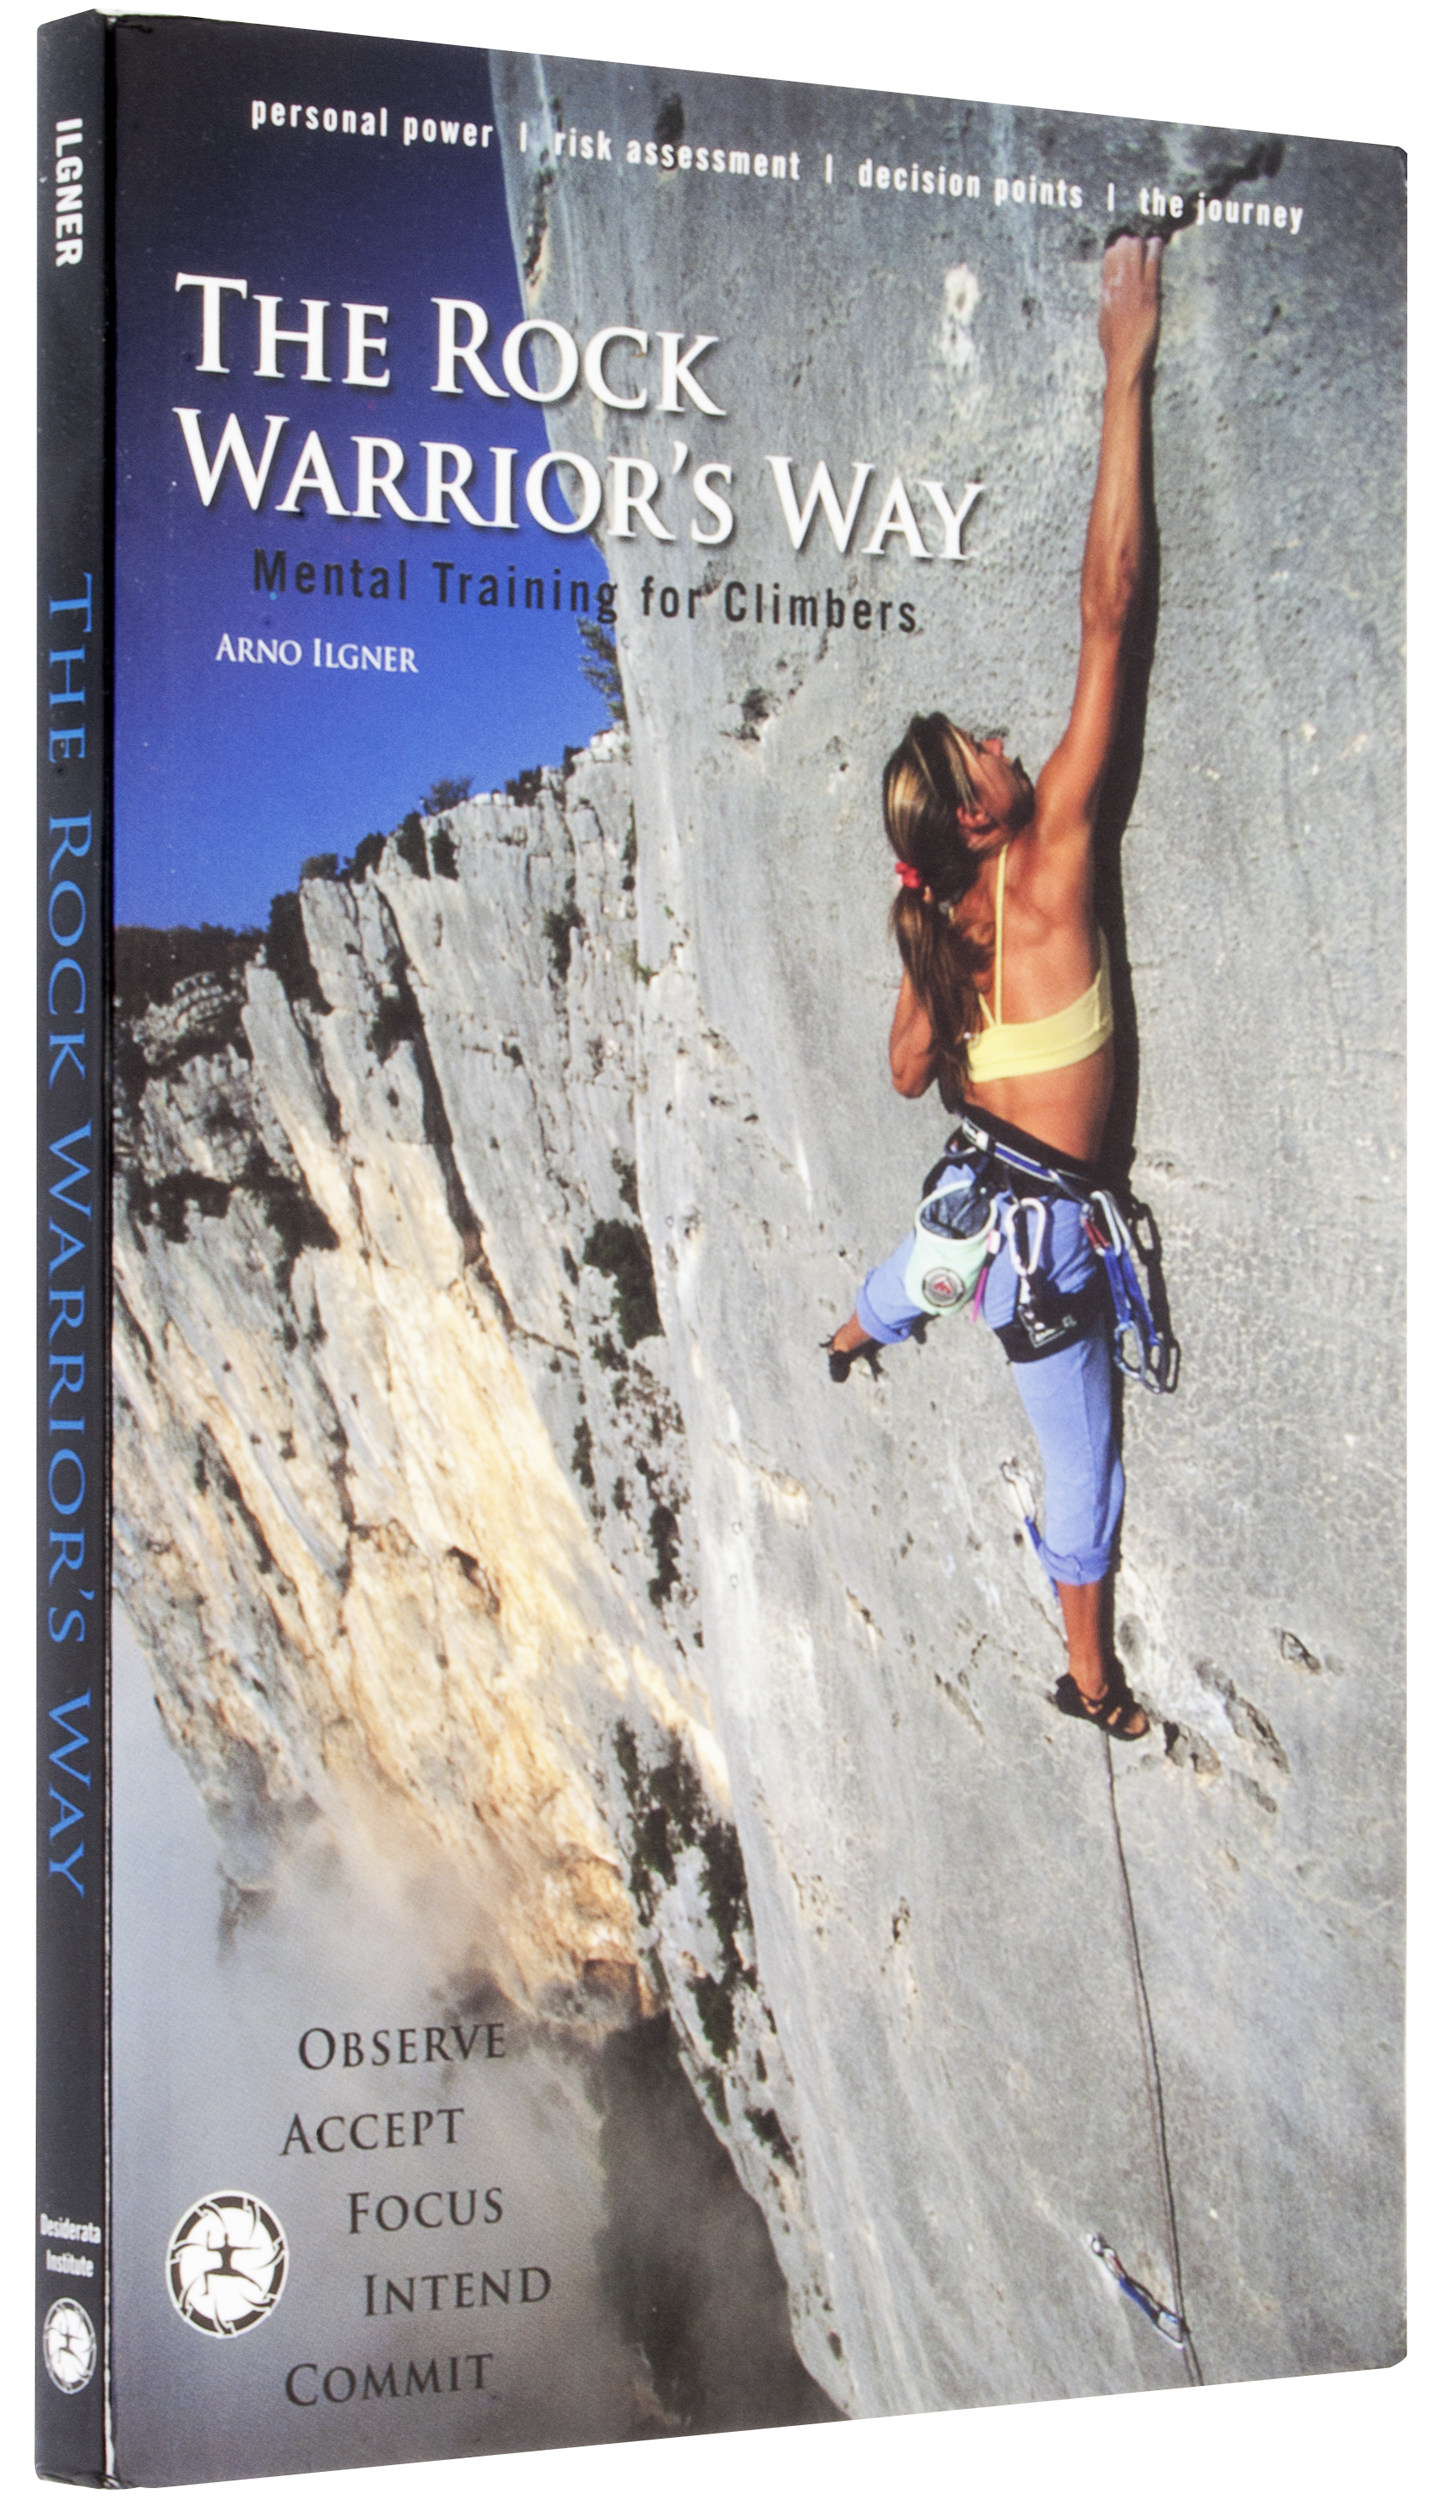 best rock climbing mental training book: The Rock Warrior's Way by Arno Ilgner